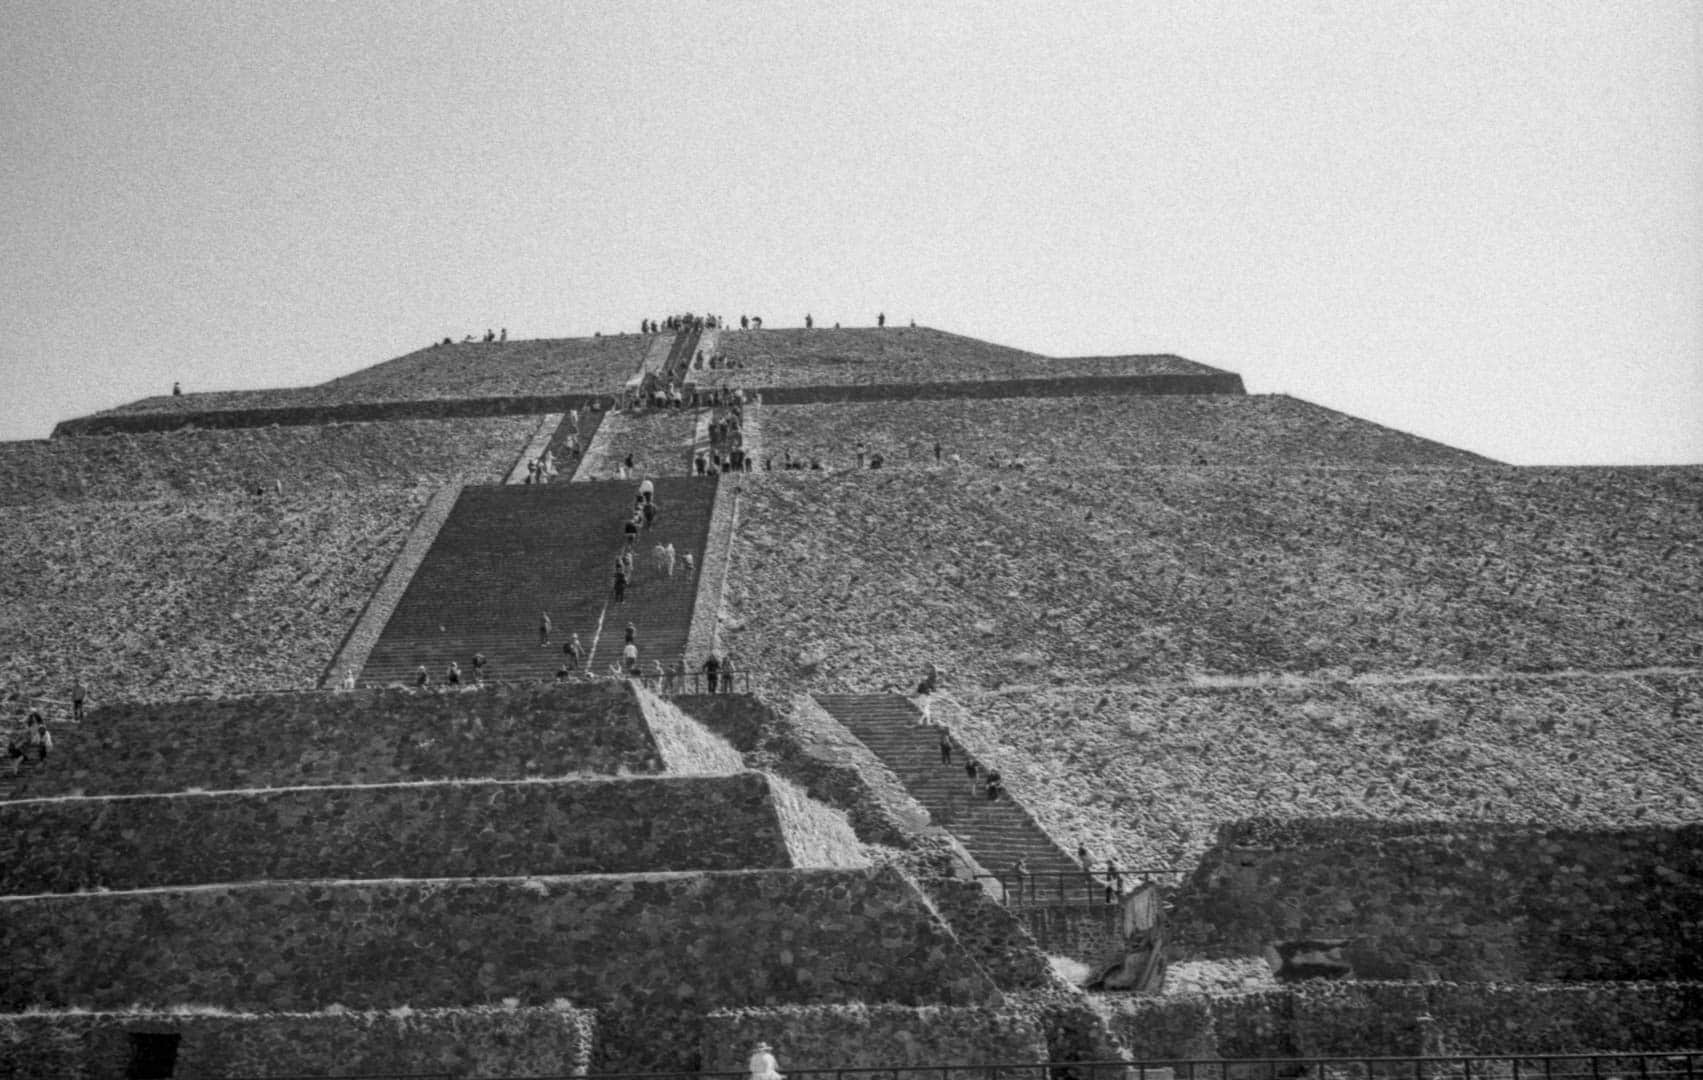 A large Teotihuacan pyrimid with many people walking up